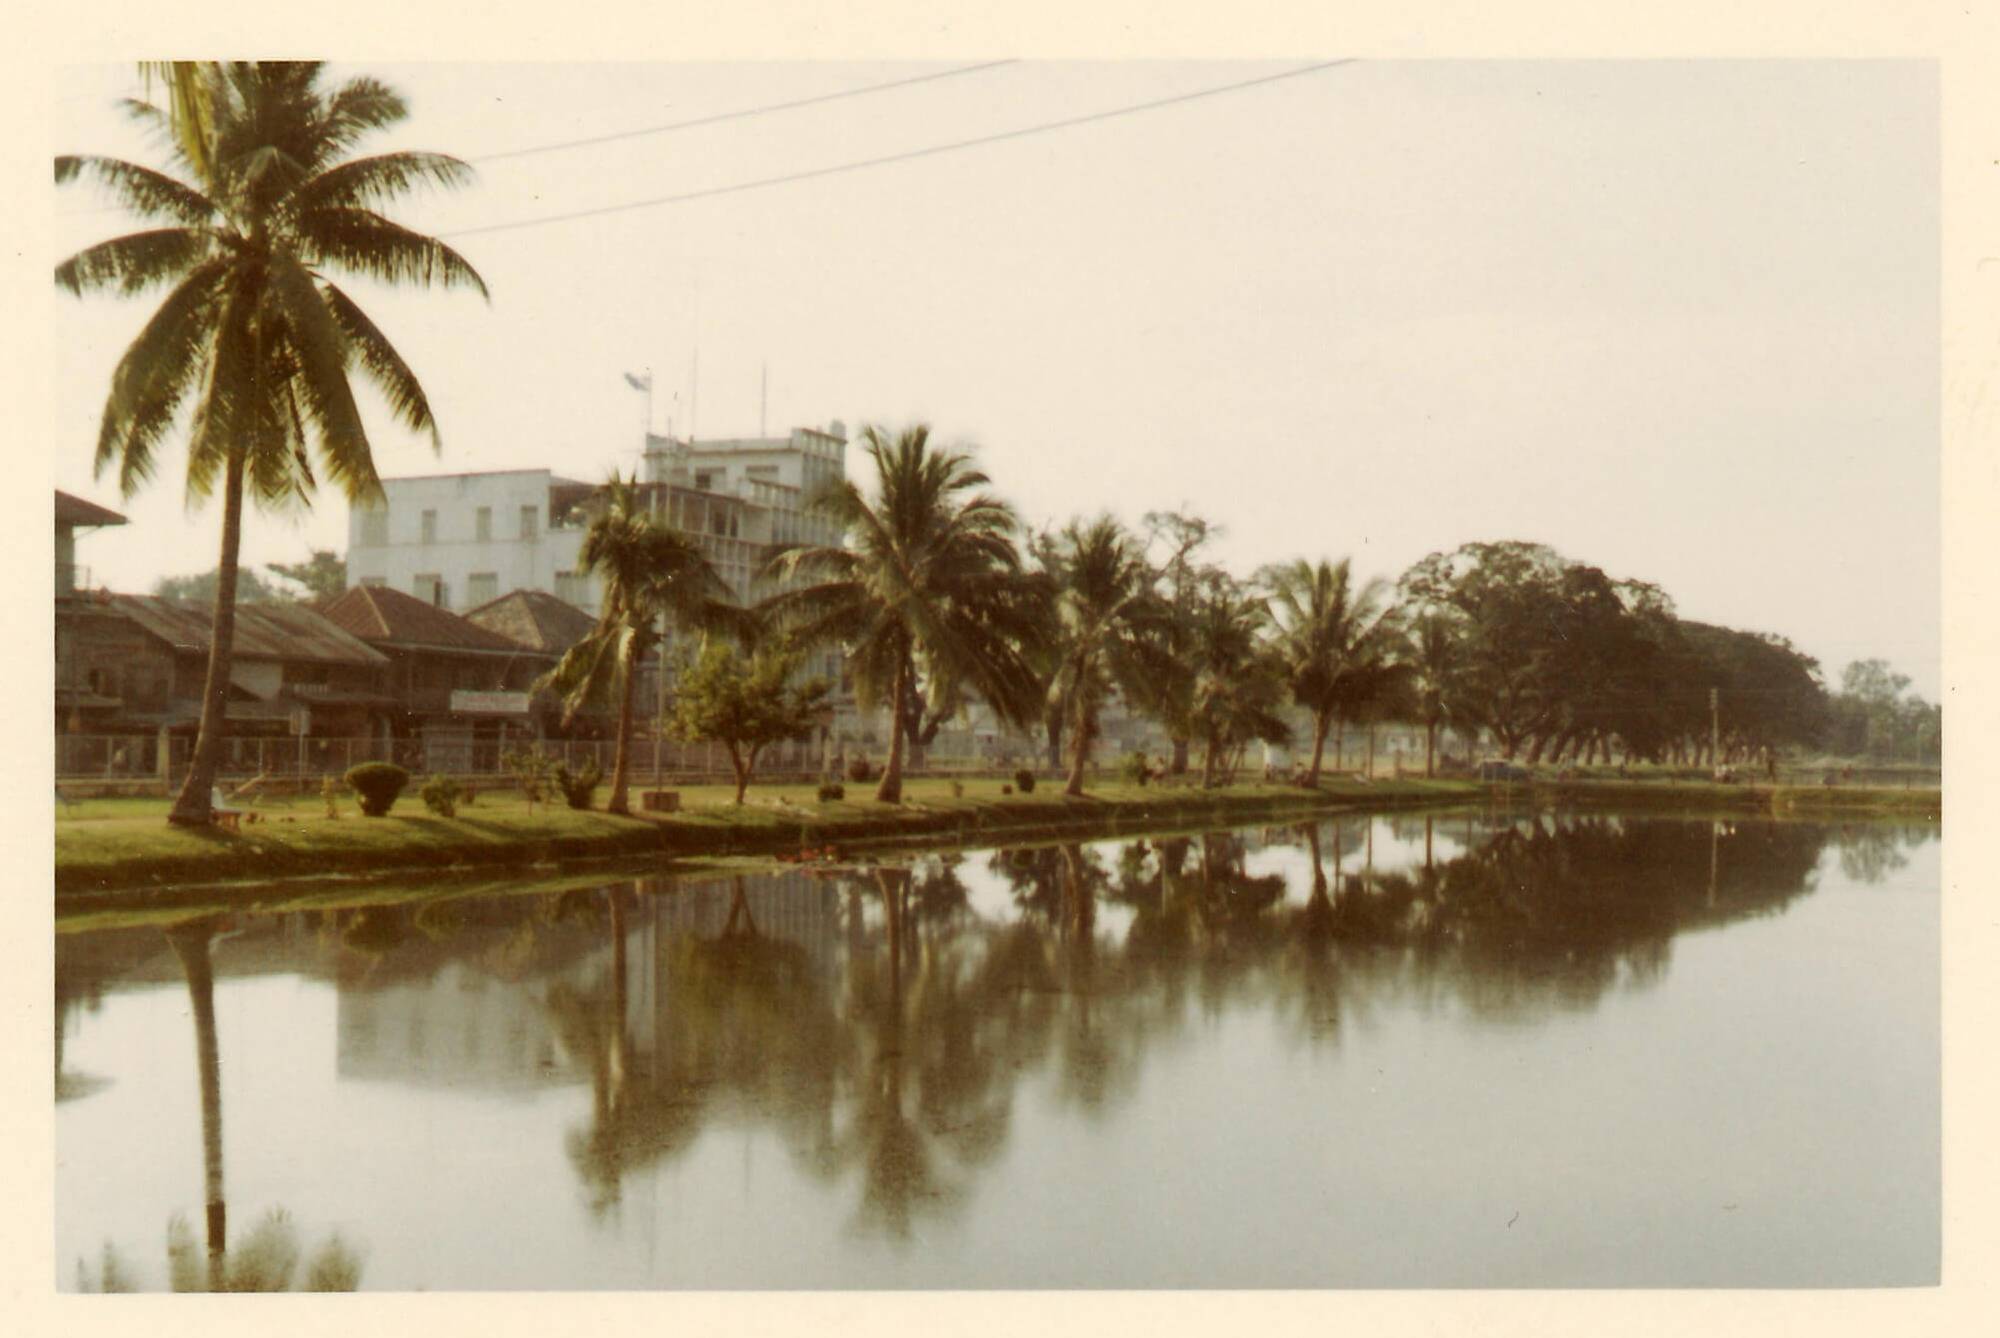 Buildings, shacks, and palm trees along a body of water.